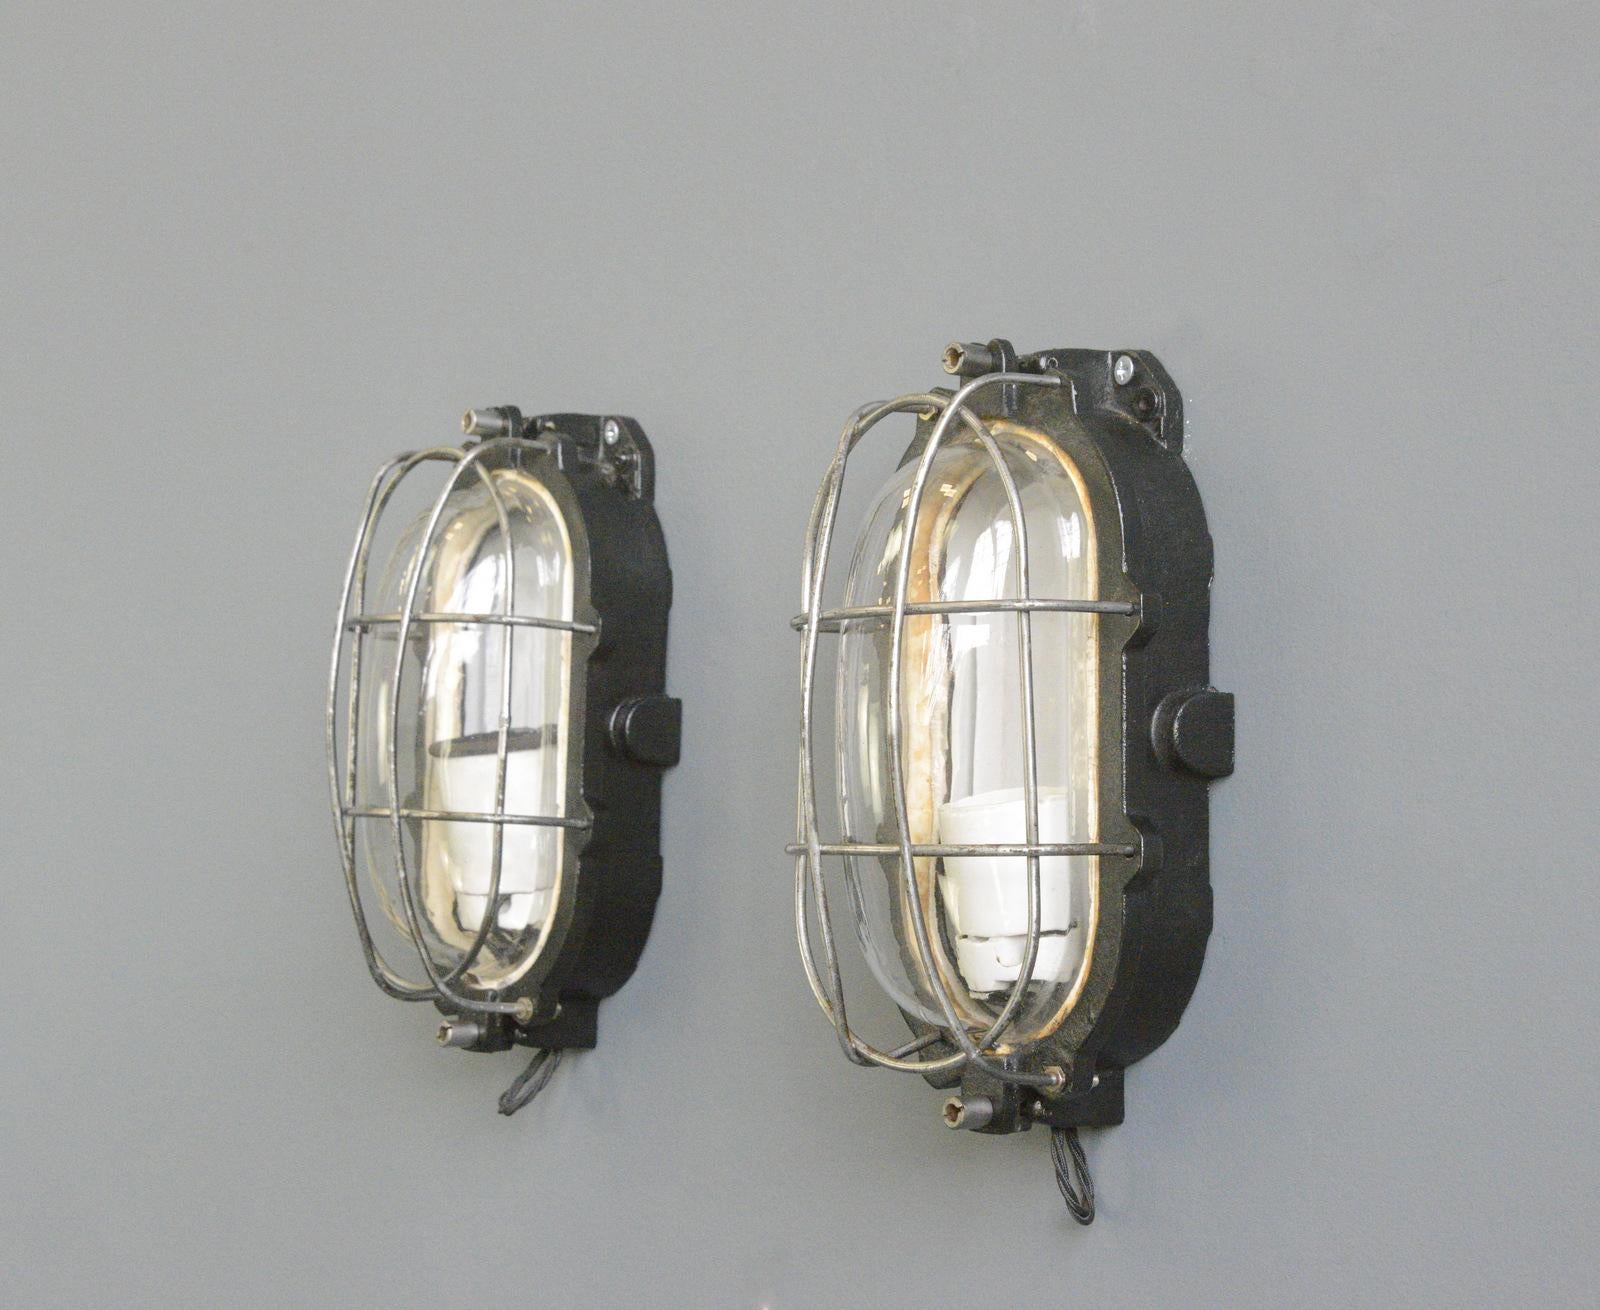 - Cast iron casing 
- Heavy domed glass with protective steel cage
- Takes 1x E27 fitting bulbs
- Can be used both inside and out
- Made by Siemens Schuckert, Berlin
- German ~ 1930s
- 30cm tall x 16cm wide x 14cm deep

Siemens

Siemens &